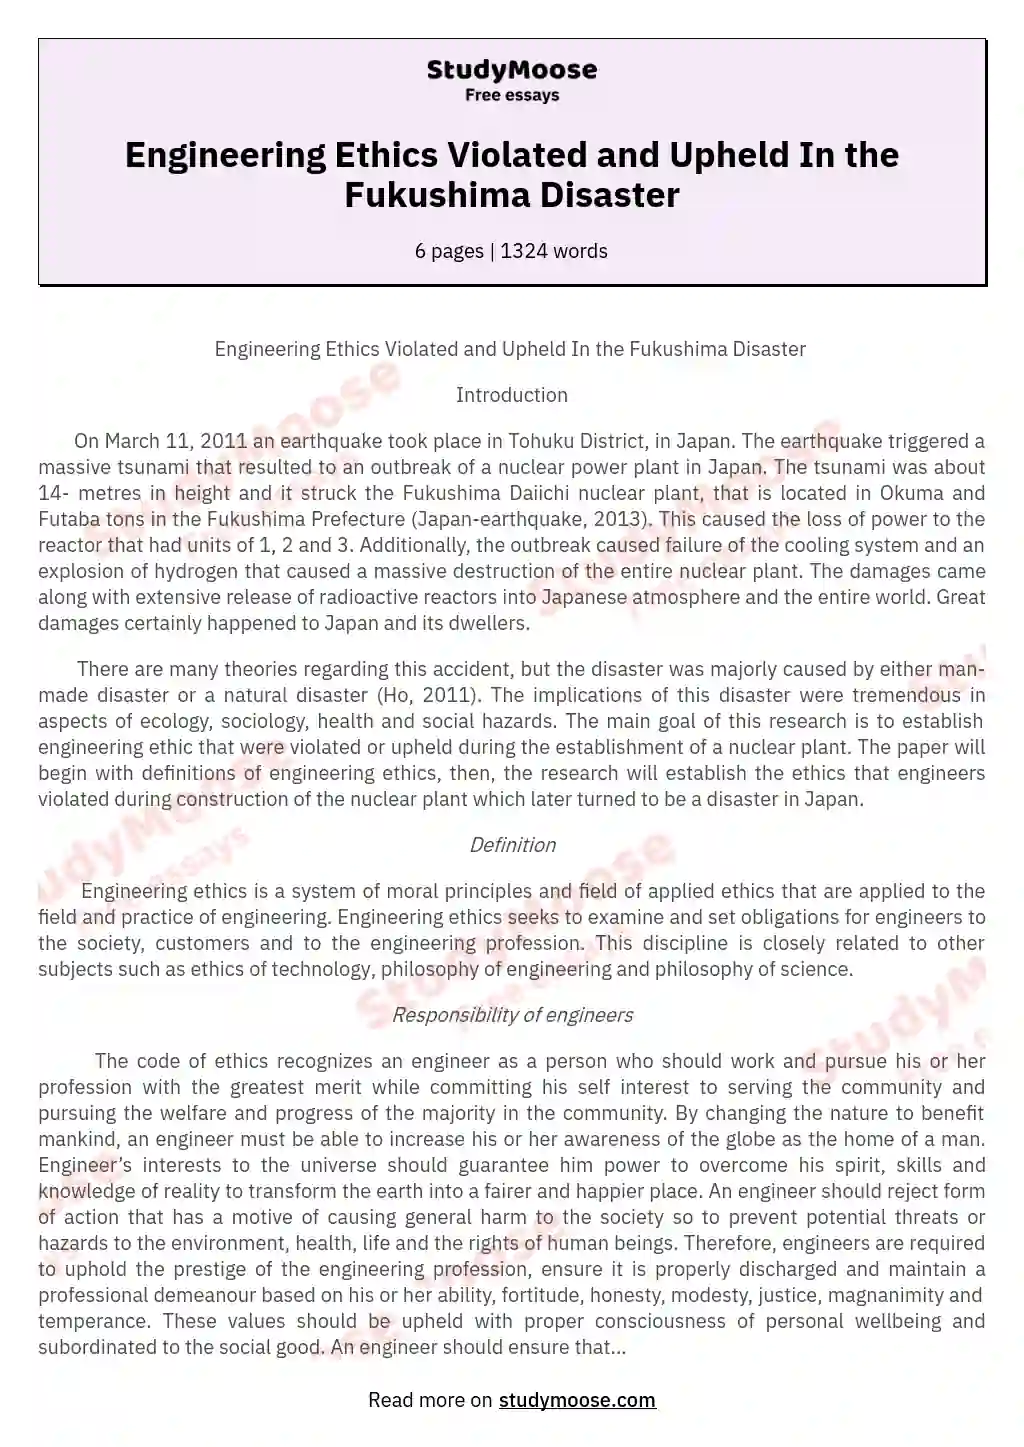 Engineering Ethics Violated and Upheld In the Fukushima Disaster essay